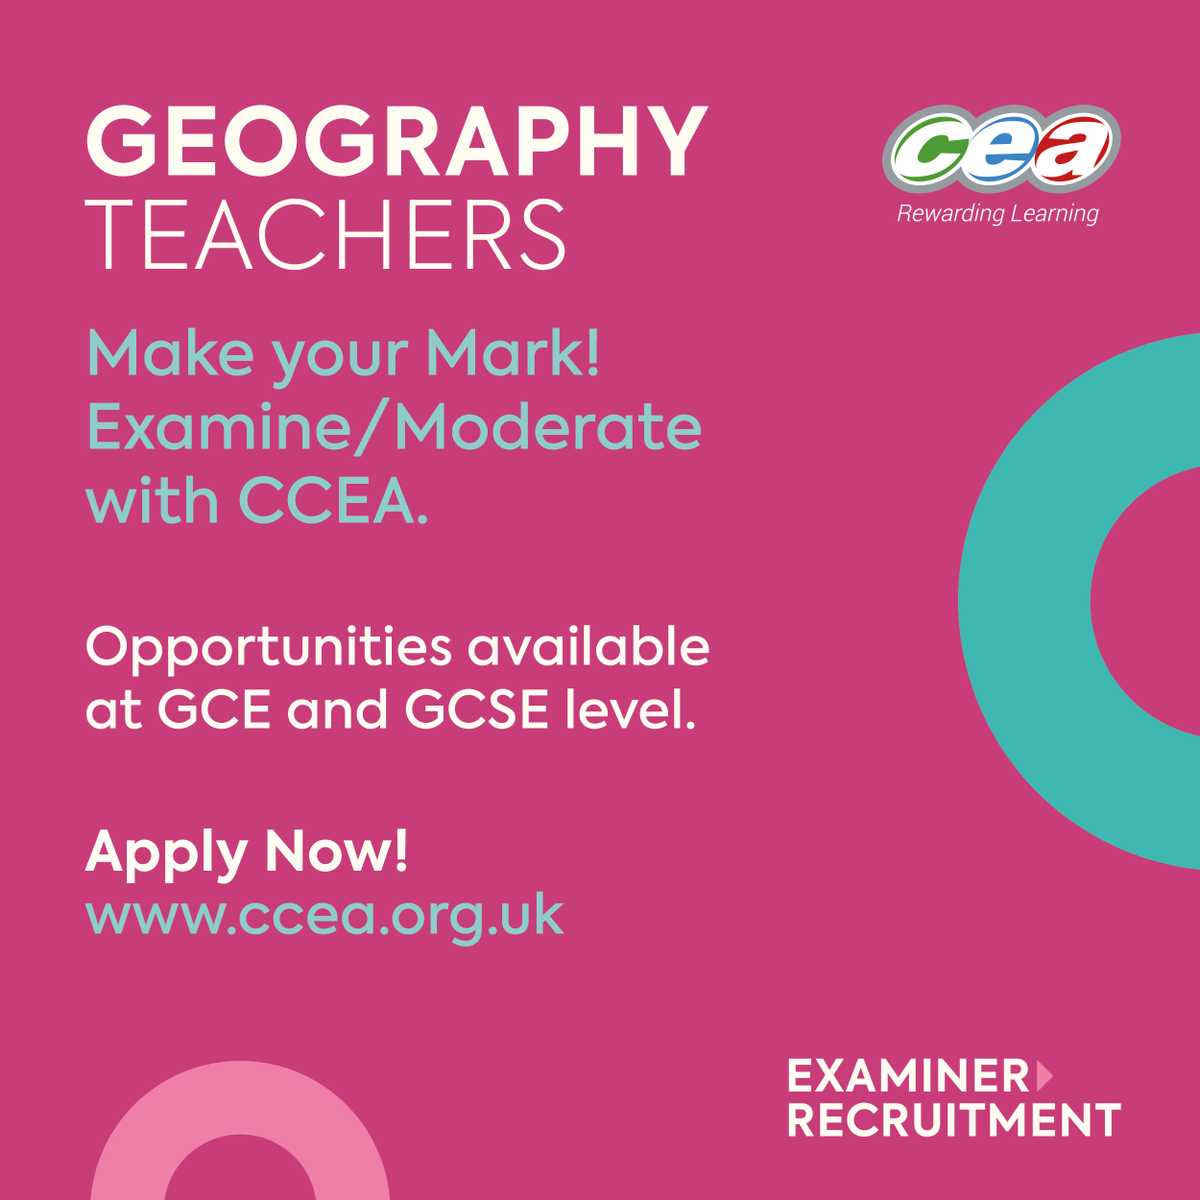 📣Do you teach GCE and or GCSE Geography❔If so we are recruiting for examiners at both levels. To apply visit: ow.ly/UfTs50OBvC4